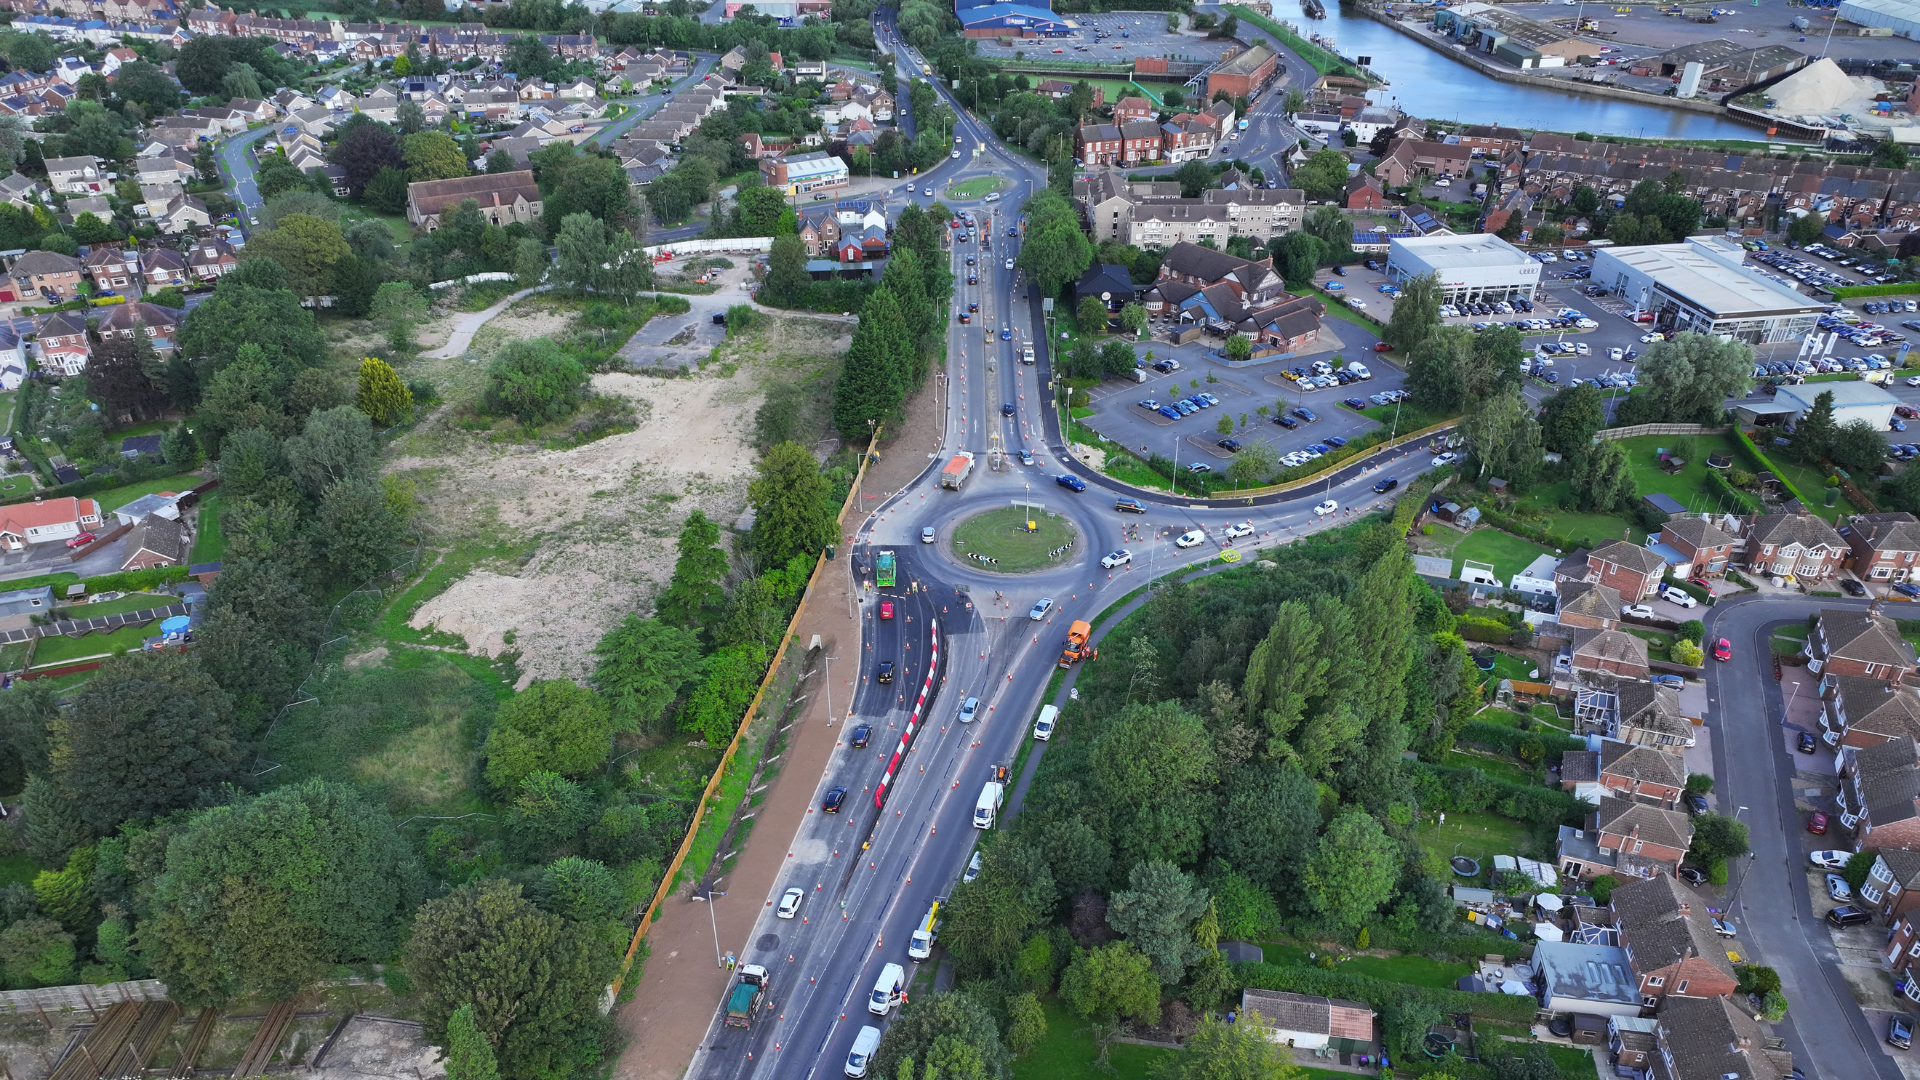 A birds eye view of the Marsh Lane roundabout.